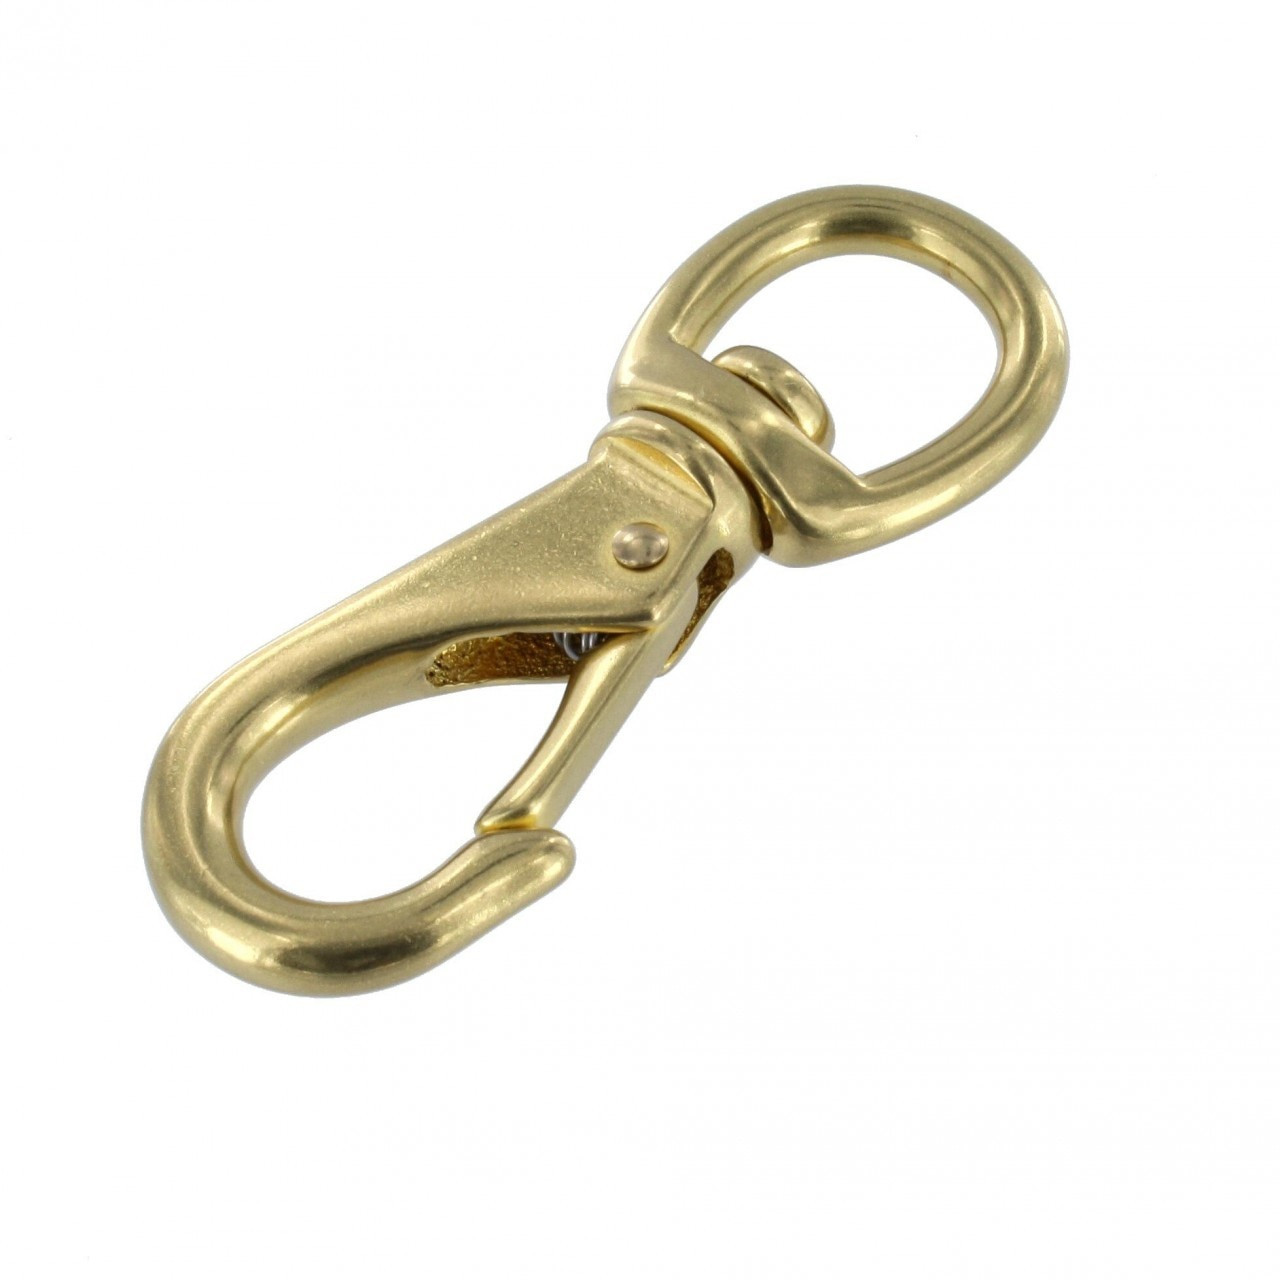 Solid Brass Lever Snap for Leather, Bags, Leashes & Accessories | | (251-0K-BOCR2-LL)